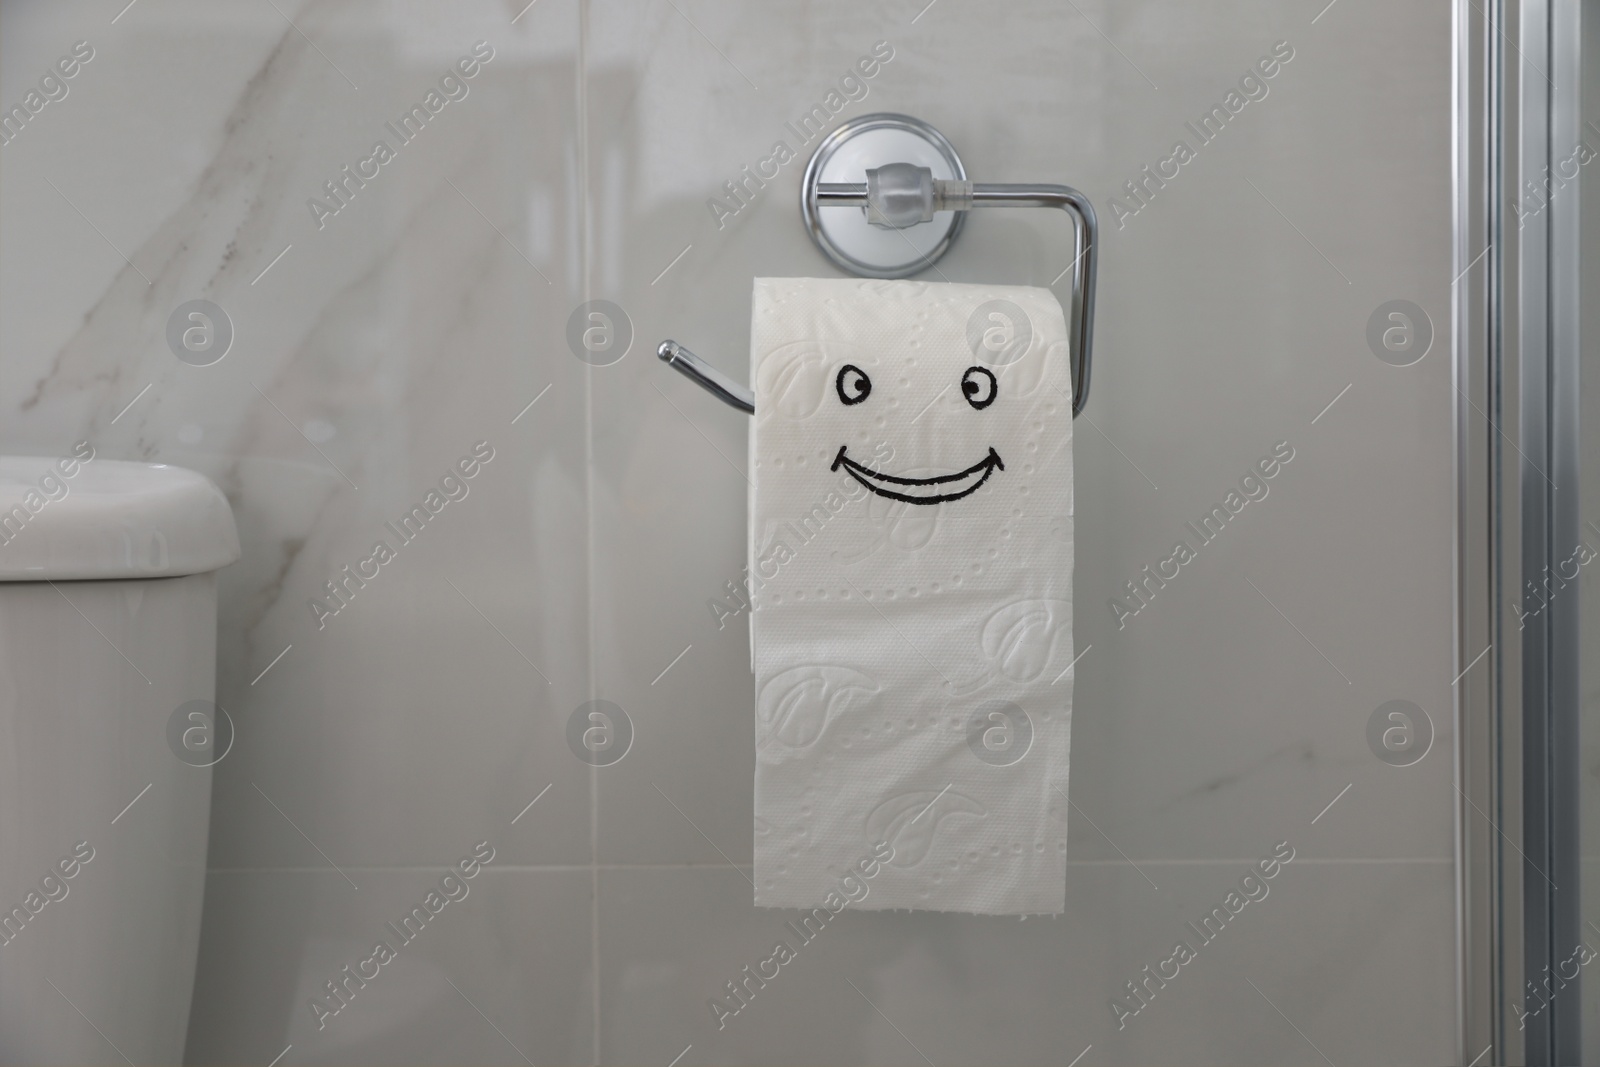 Photo of Paper with drawn funny face near toilet tank in bathroom